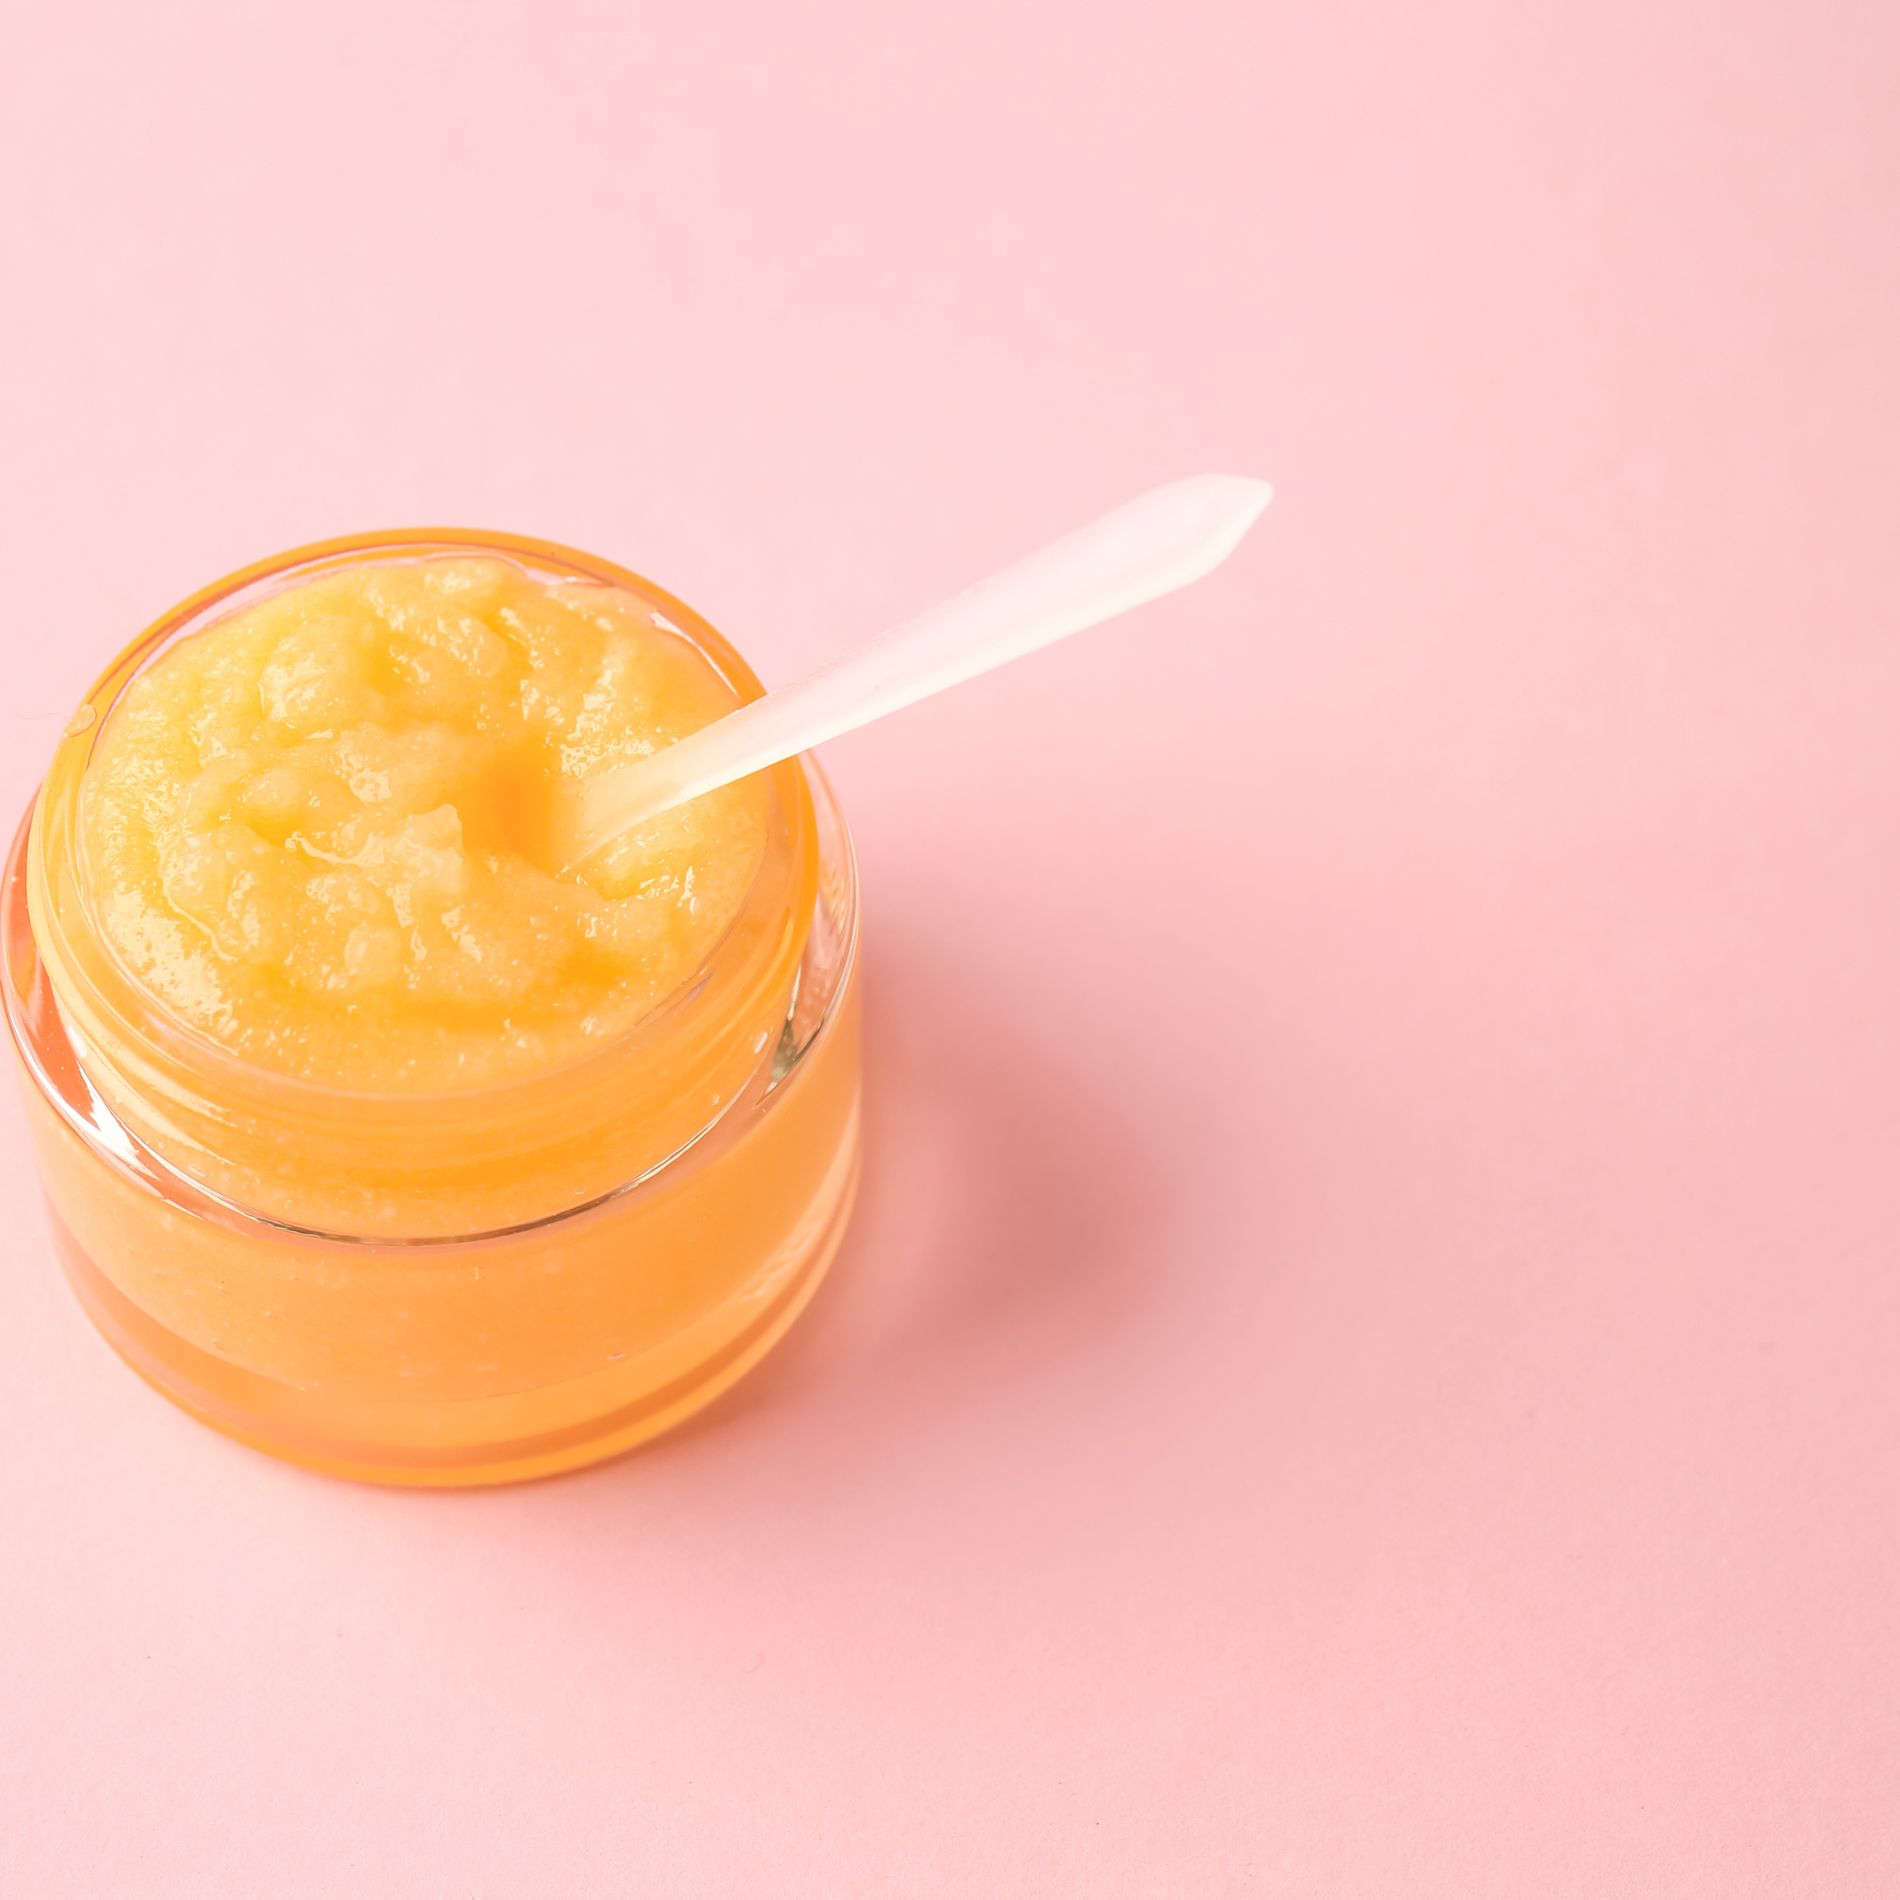 decorative image of orange sugar scrub with scoop on a pink background